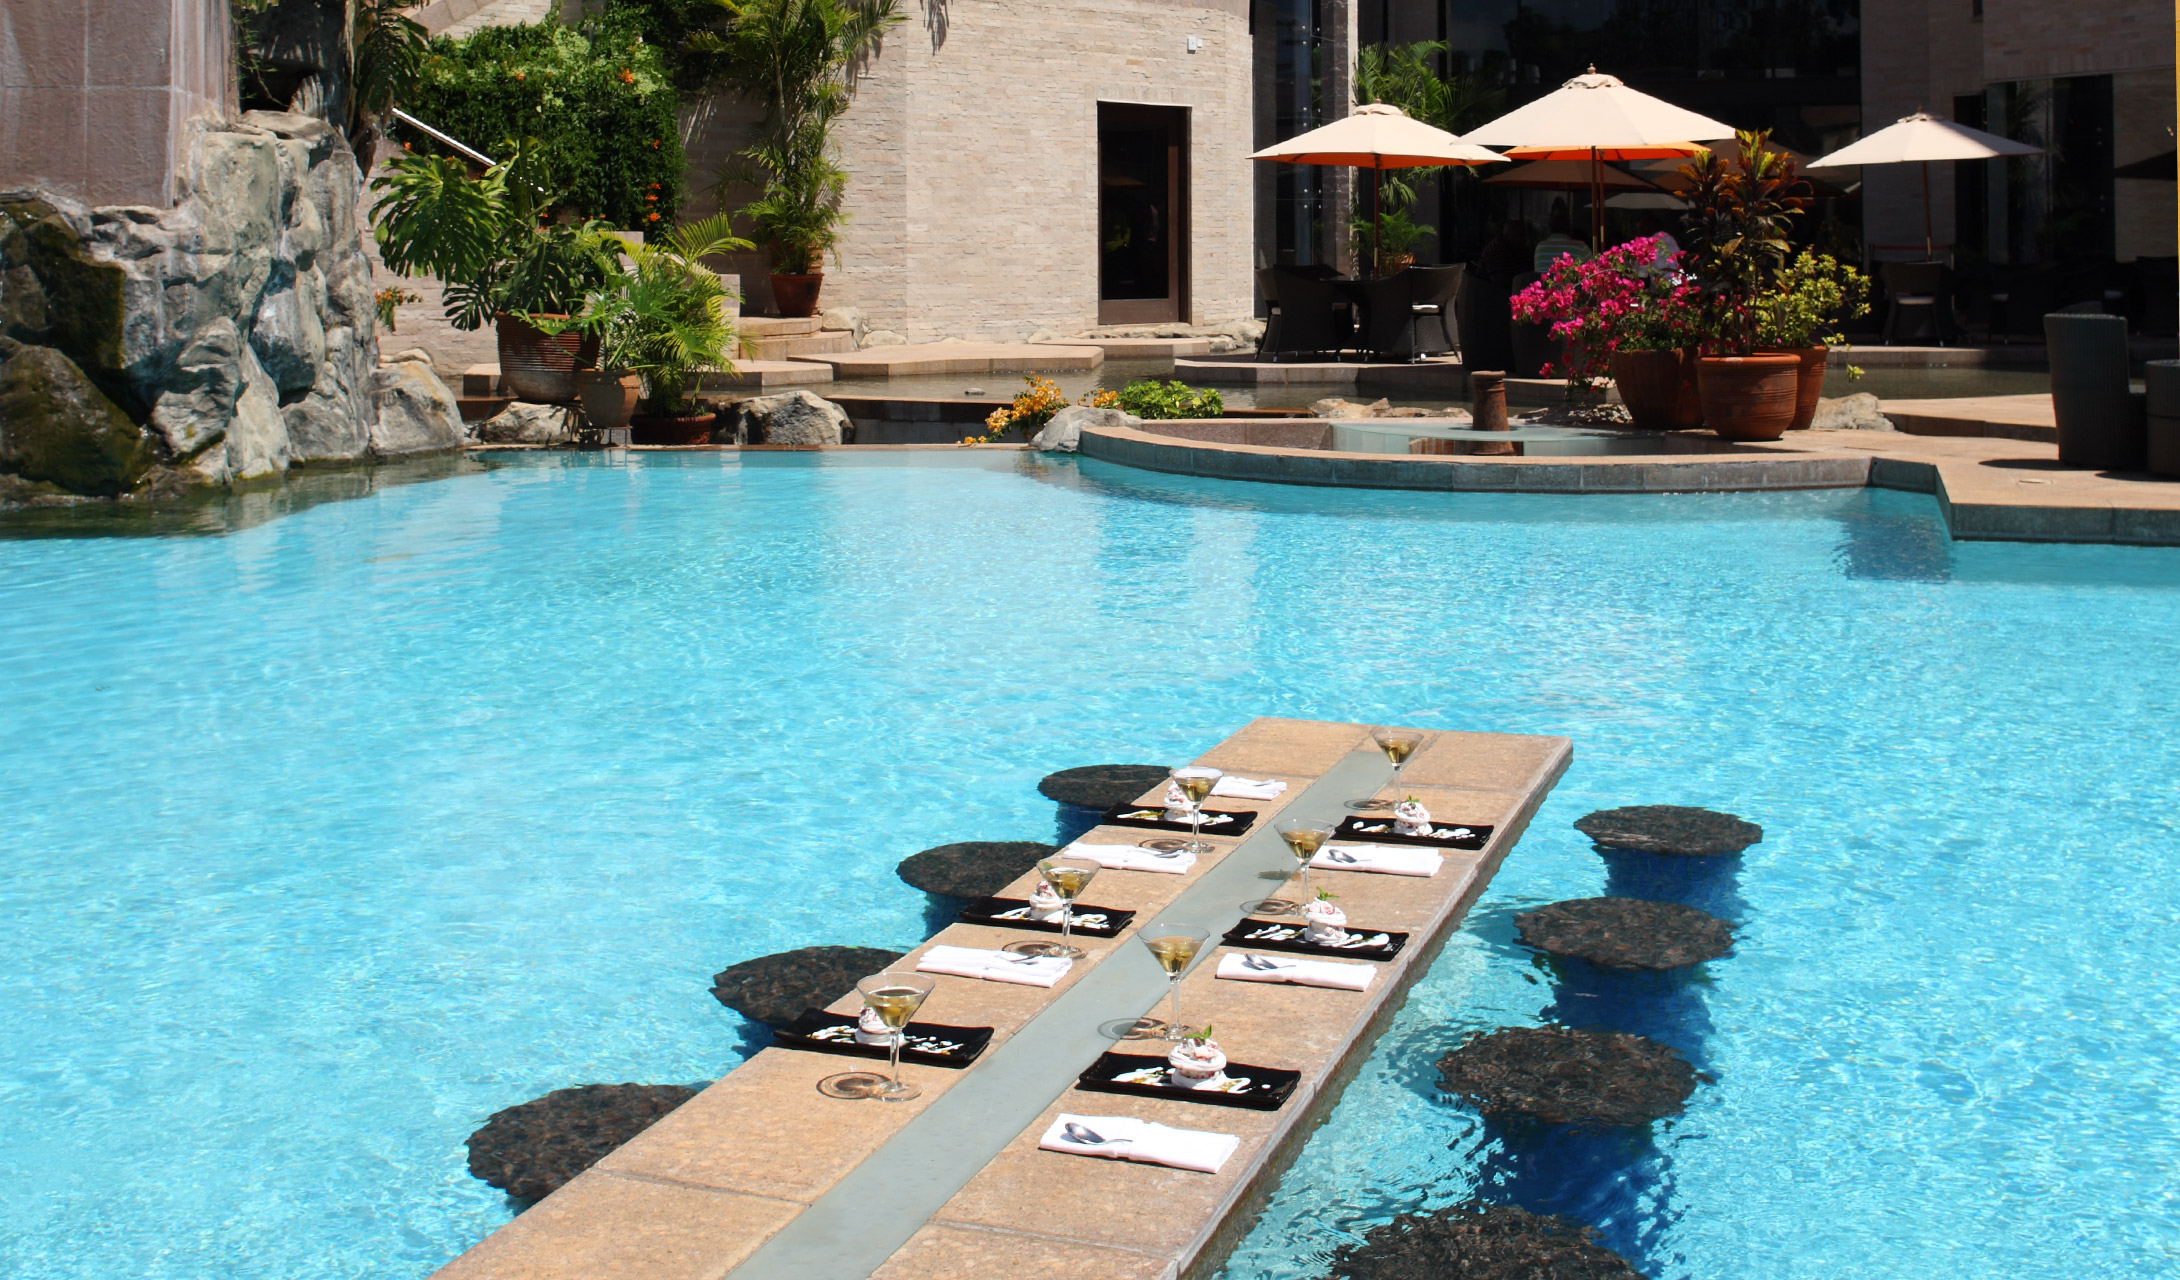 https://whownskenya.com/index.php/2022/10/27/hotels-in-nairobi-with-the-best-swimming-pools/